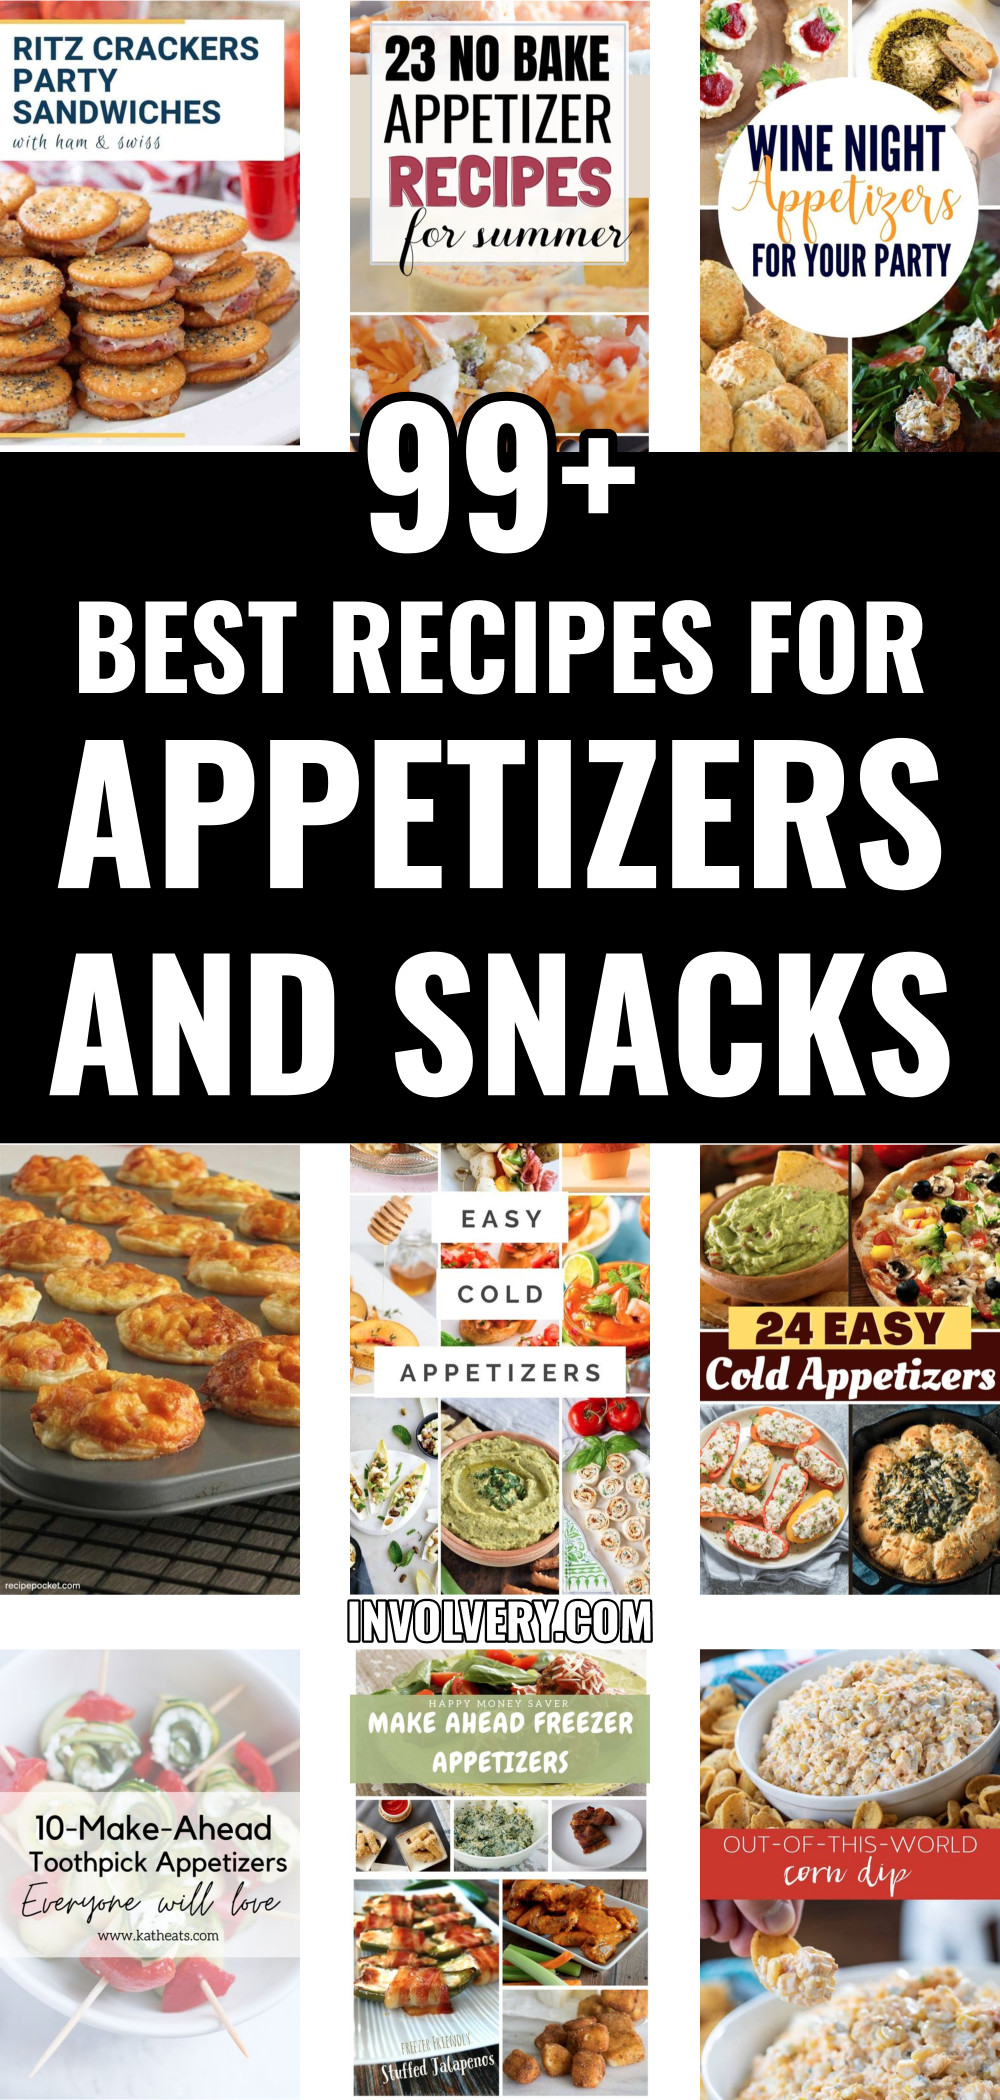 99+ Best Recipes For Appetizers and Snacks